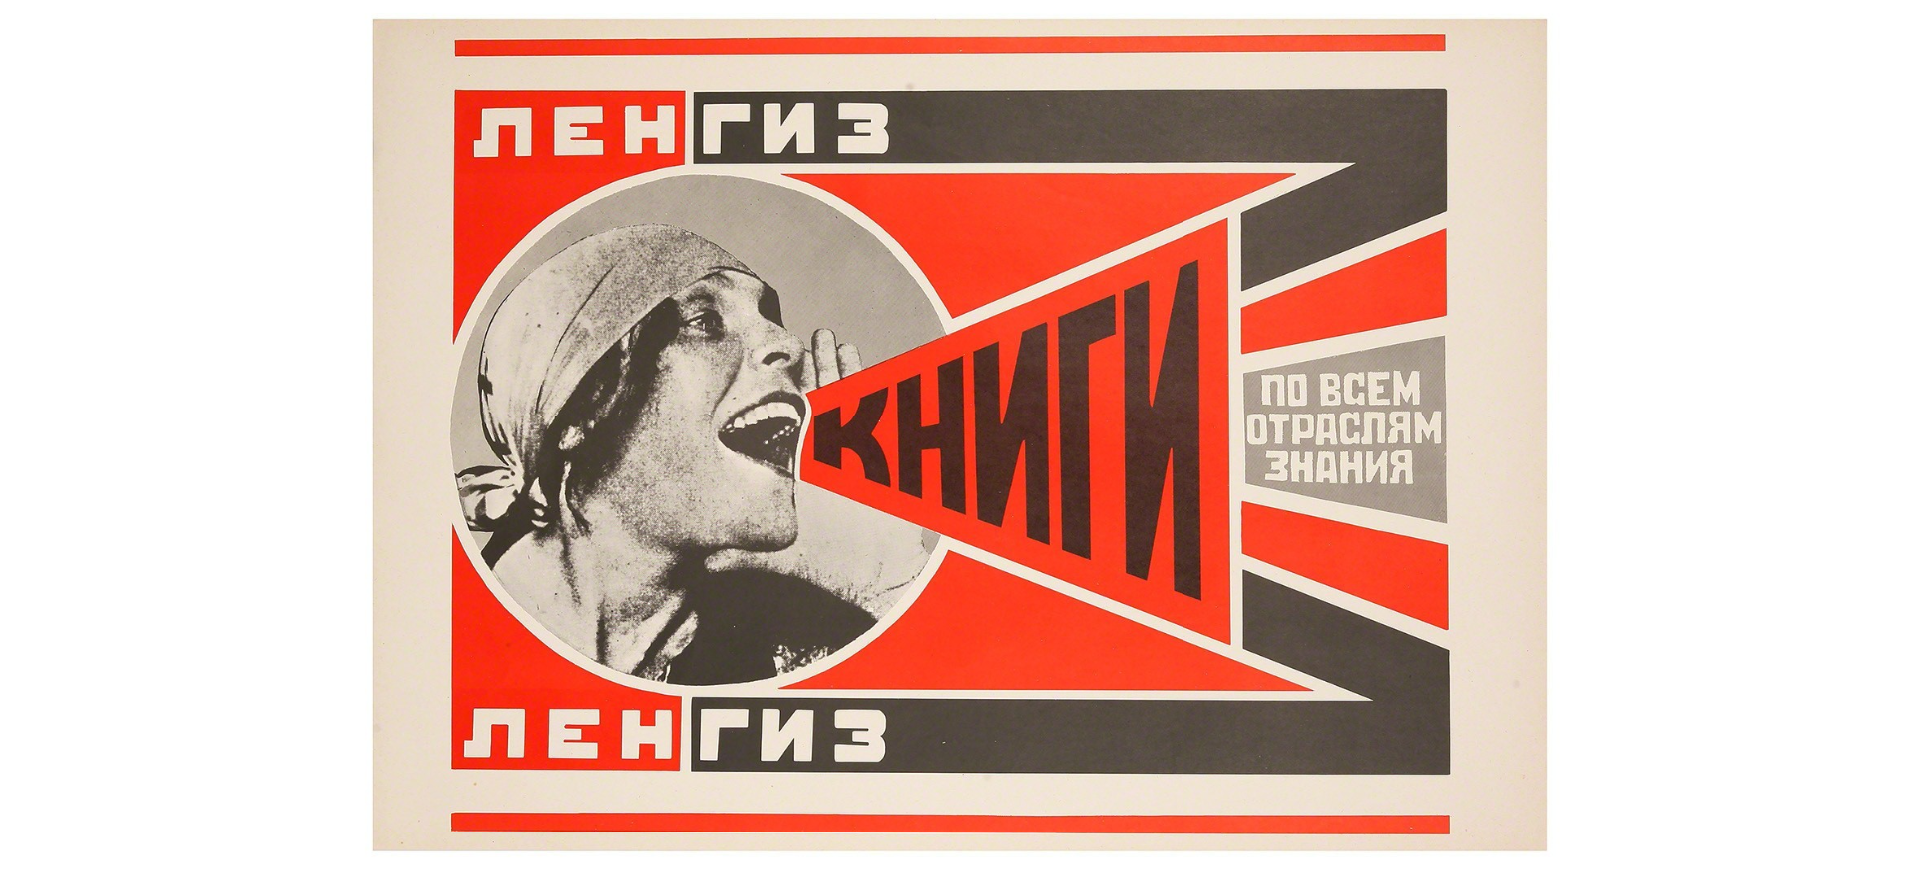 Alexander Rodchenko, Books (Please)! In All Branches of Knowledge, poster, 1924